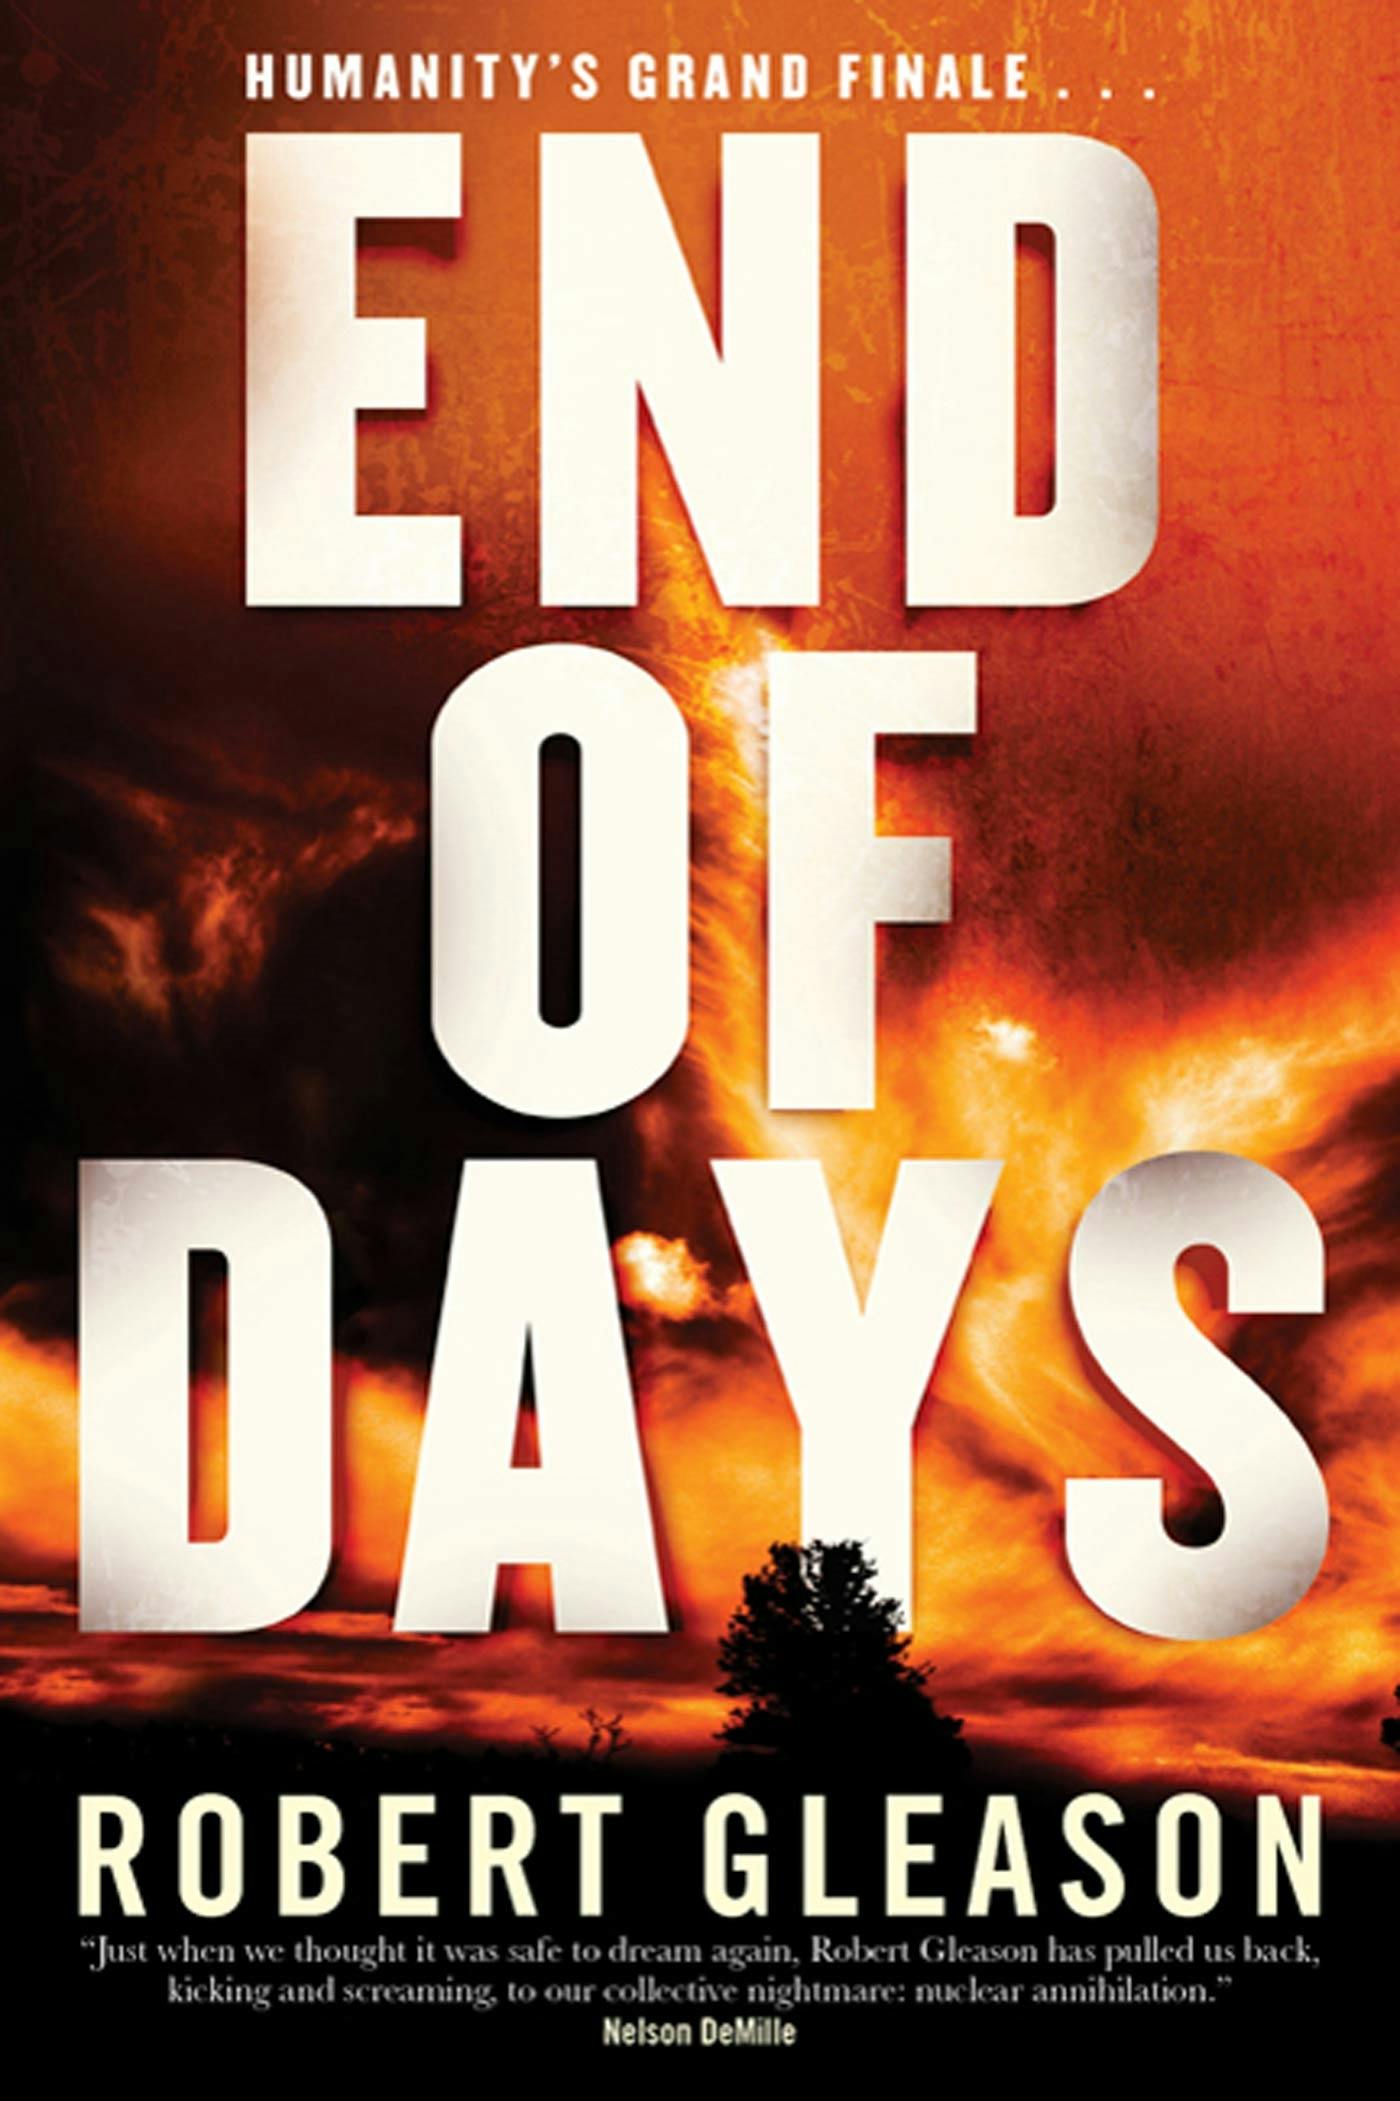 Cover for the book titled as: End of Days